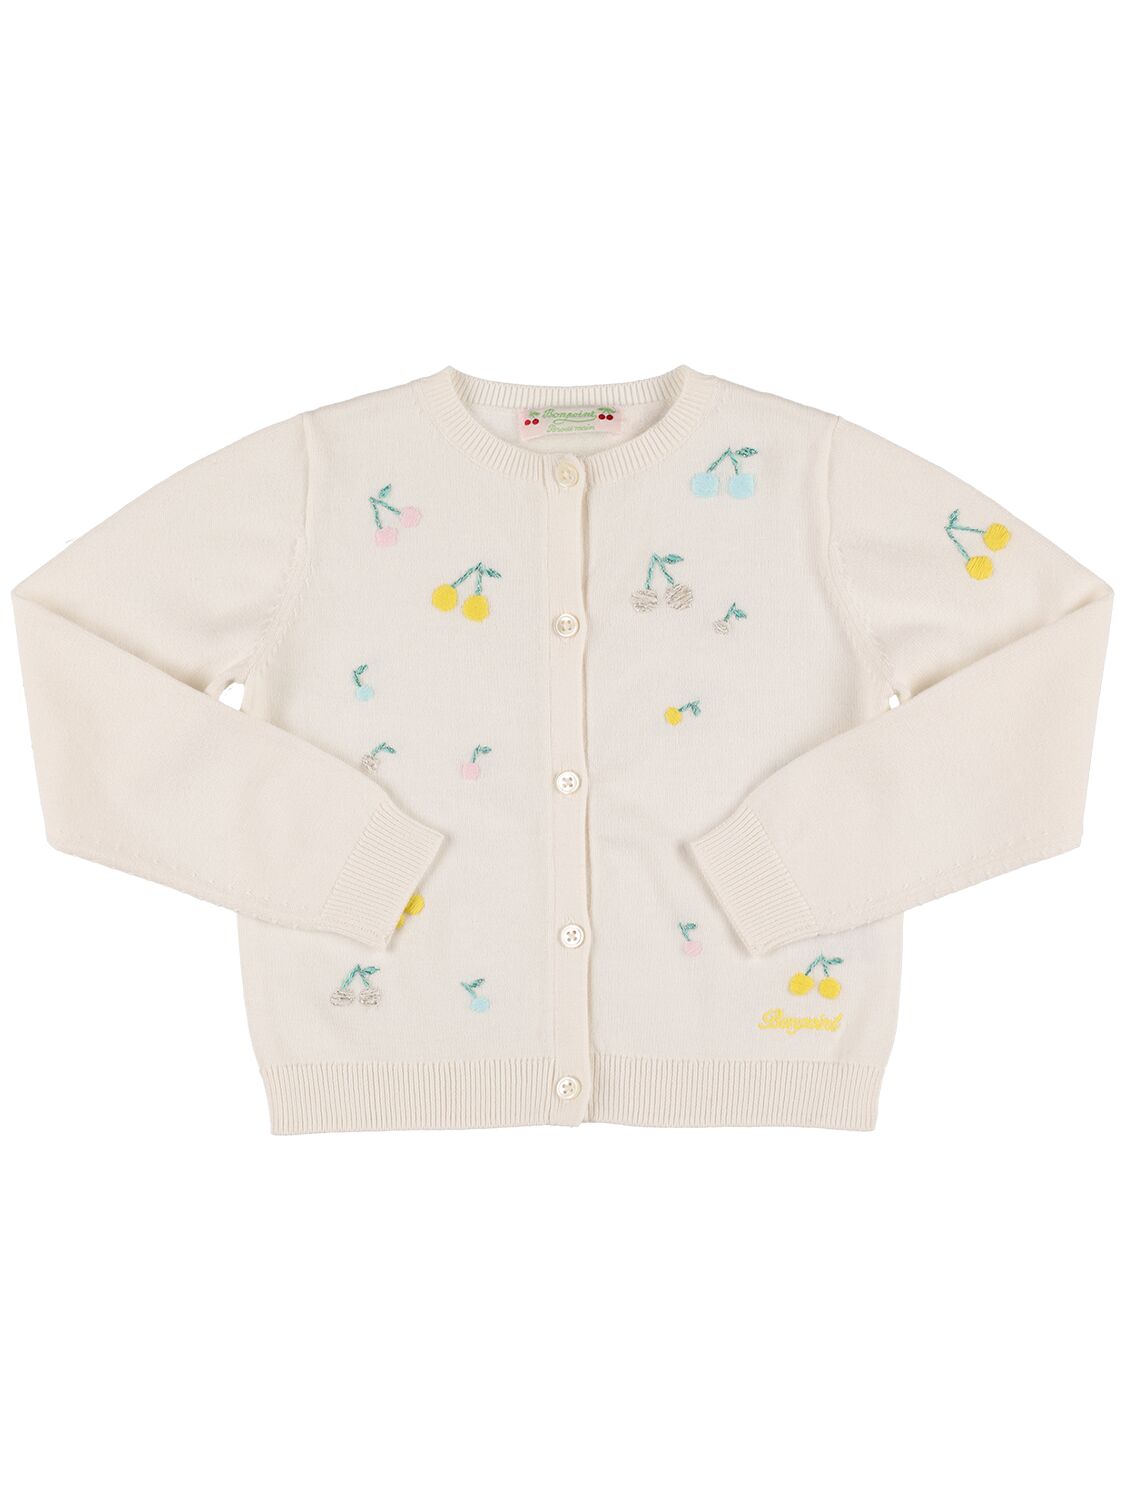 Bonpoint Kids' Cherry Embroidered Cotton Knit Cardigan In White